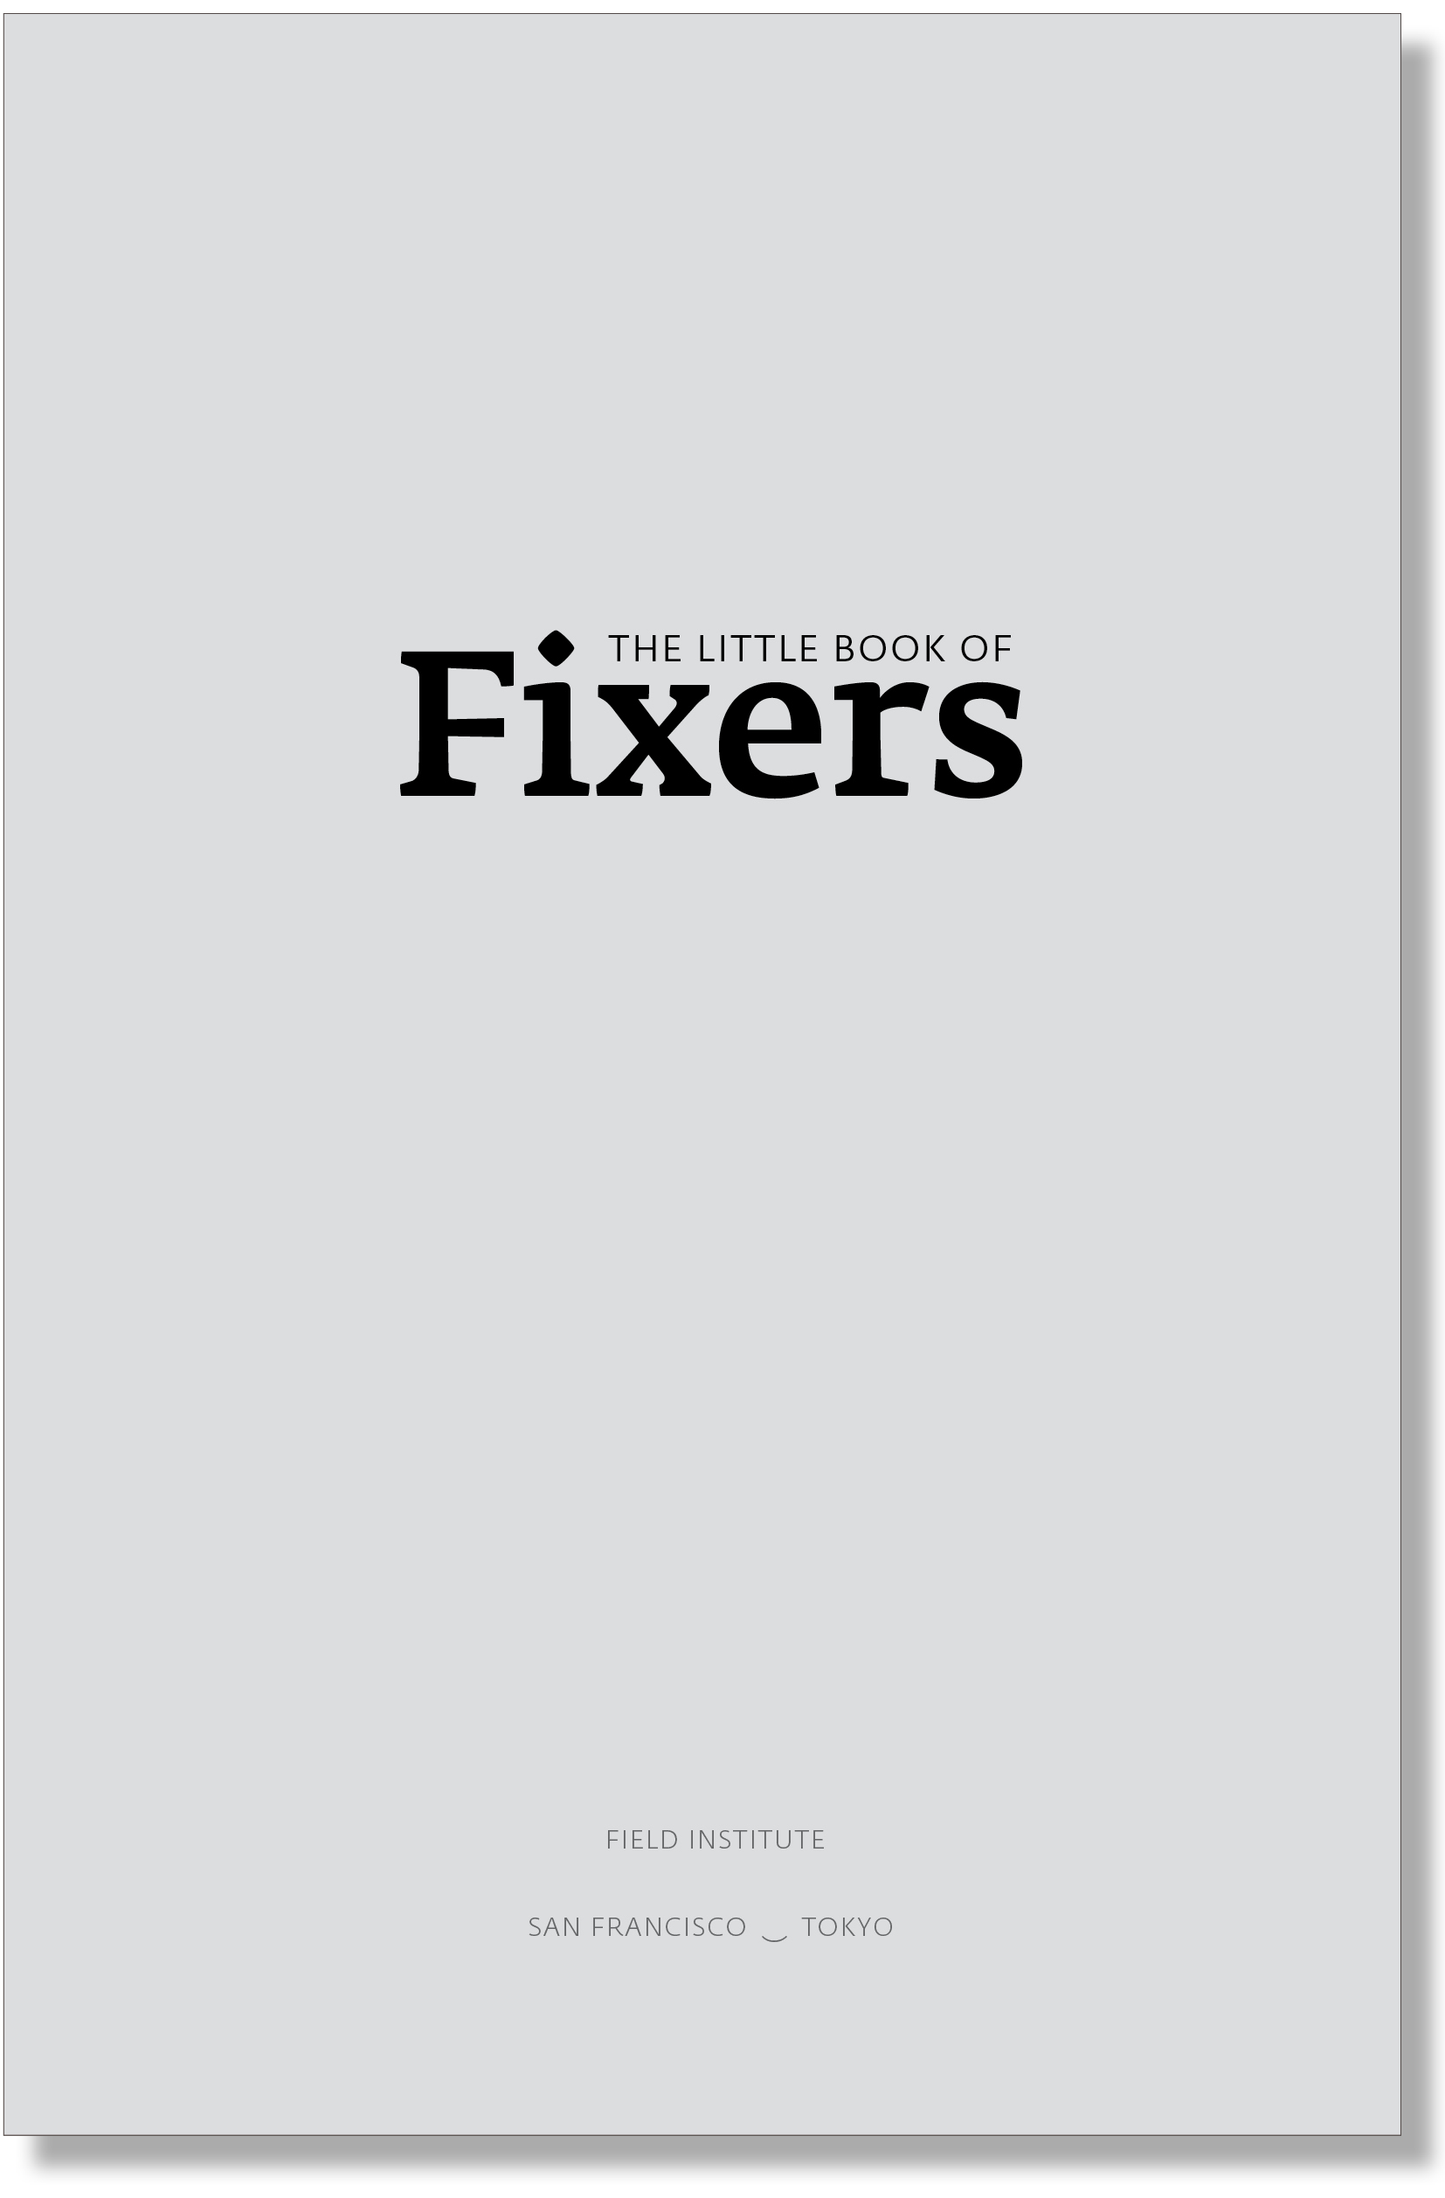 The Little Book of Fixers